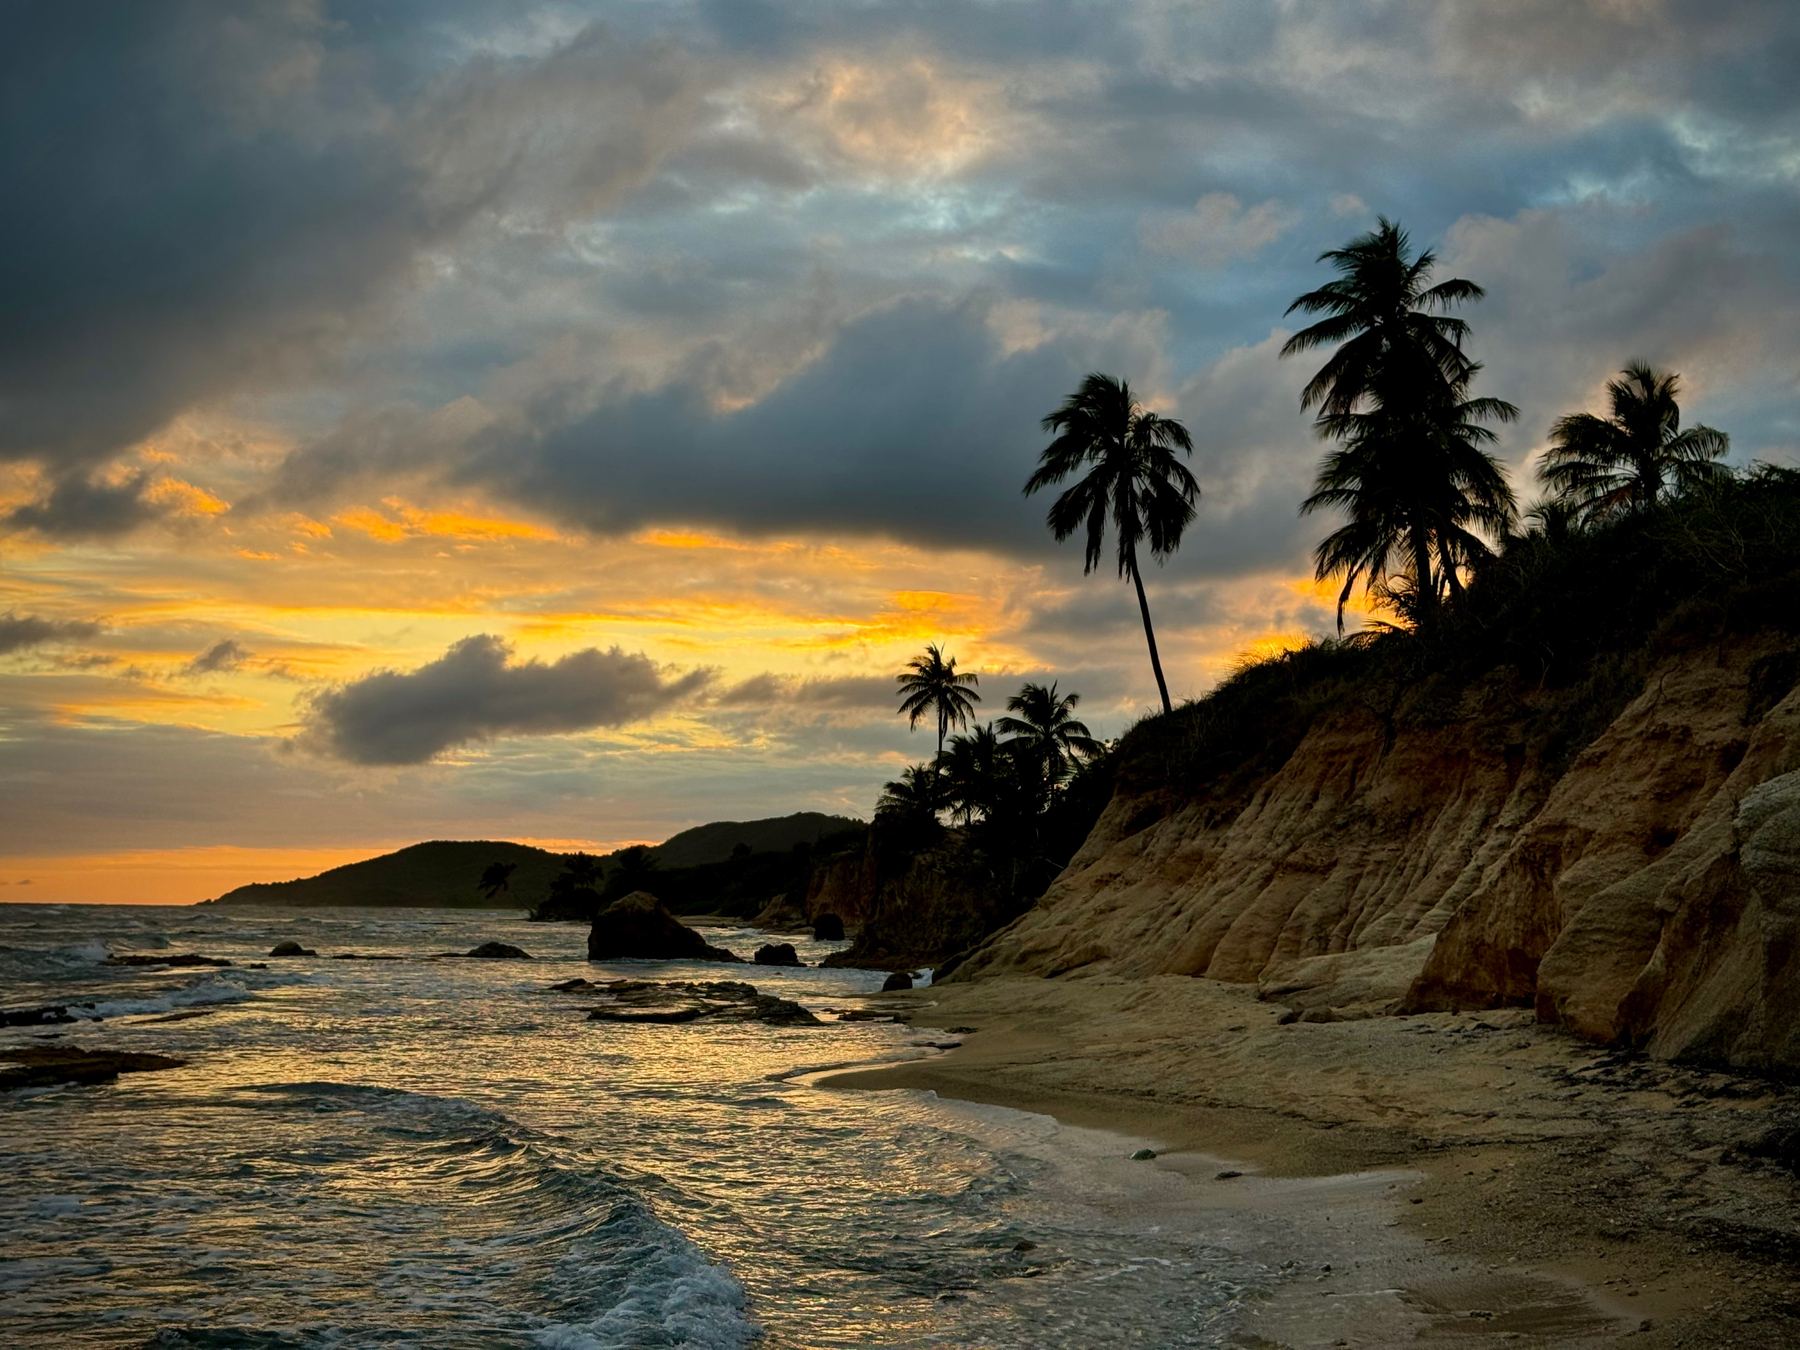 A sunset view over a tropical beach with silhouetted palm trees against a sky with orange-tinged clouds and a calm sea in the foreground.